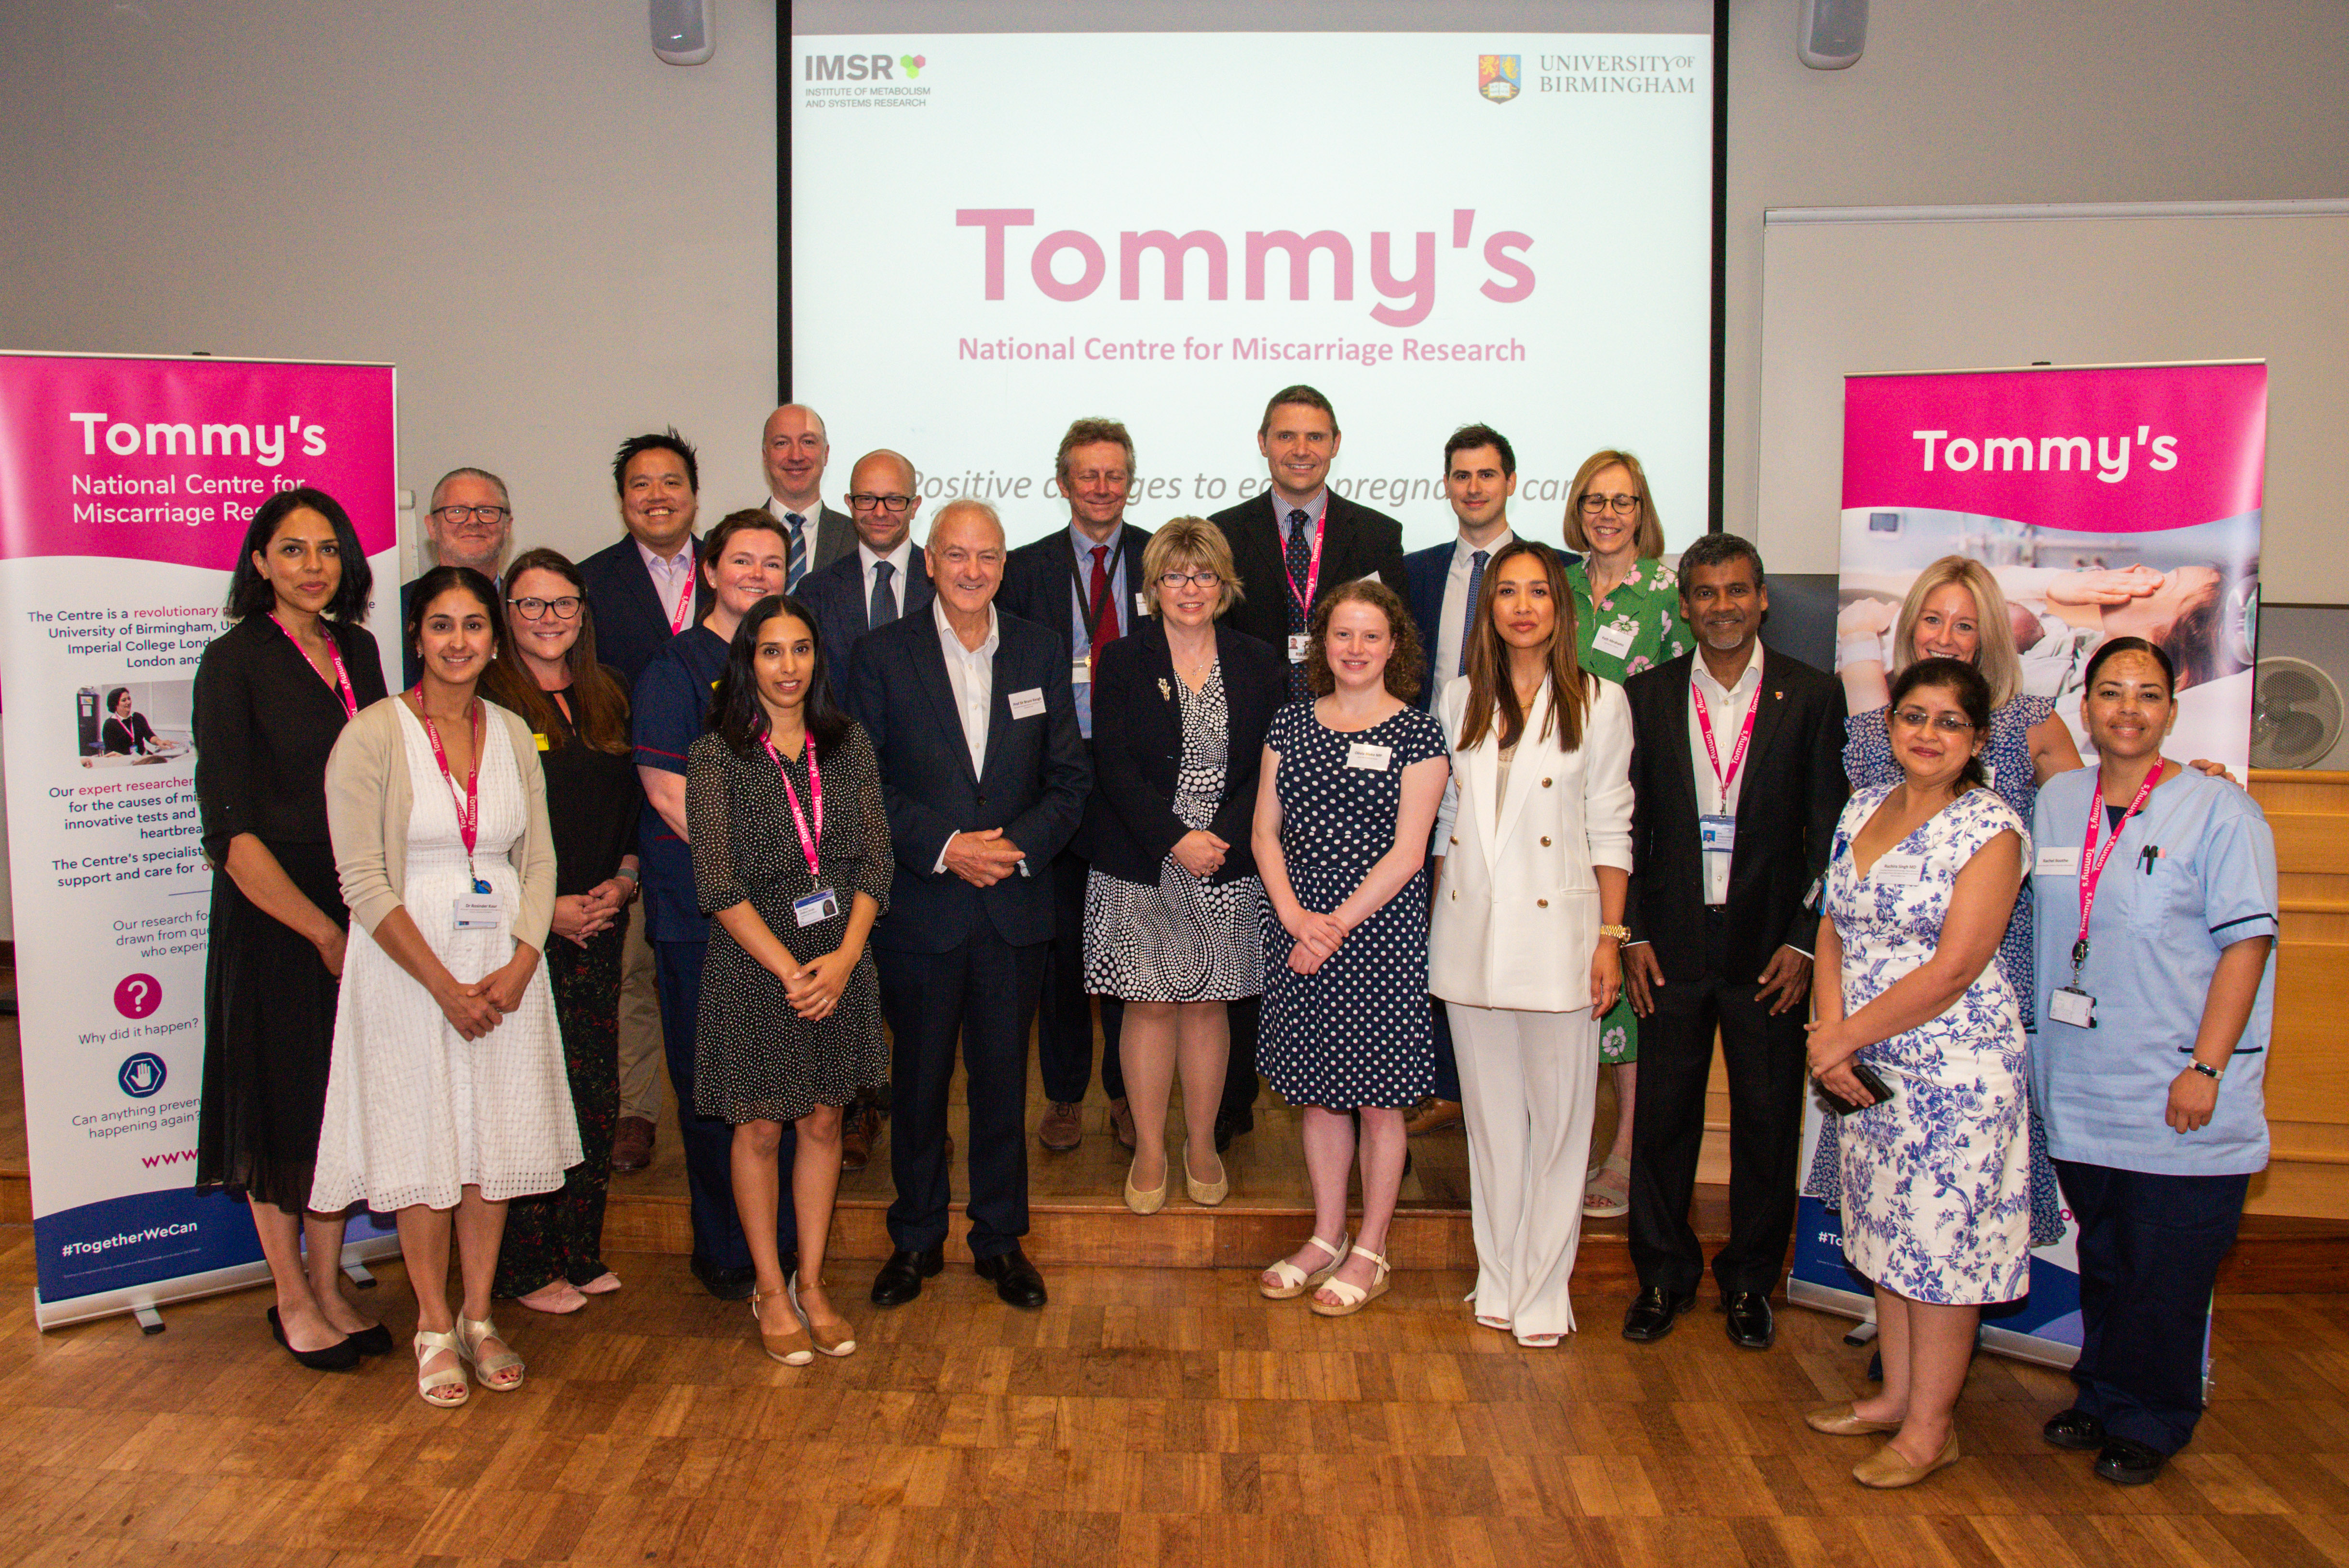 A photo from Maria Caulfield MP's visit to Tommy's National Centre for Miscarriage Research. There are 21 people in the photo smiling at the camera, including our Ambassador Myleene Klass, our CEO Kath Abrahams and Olivia Blake MP.